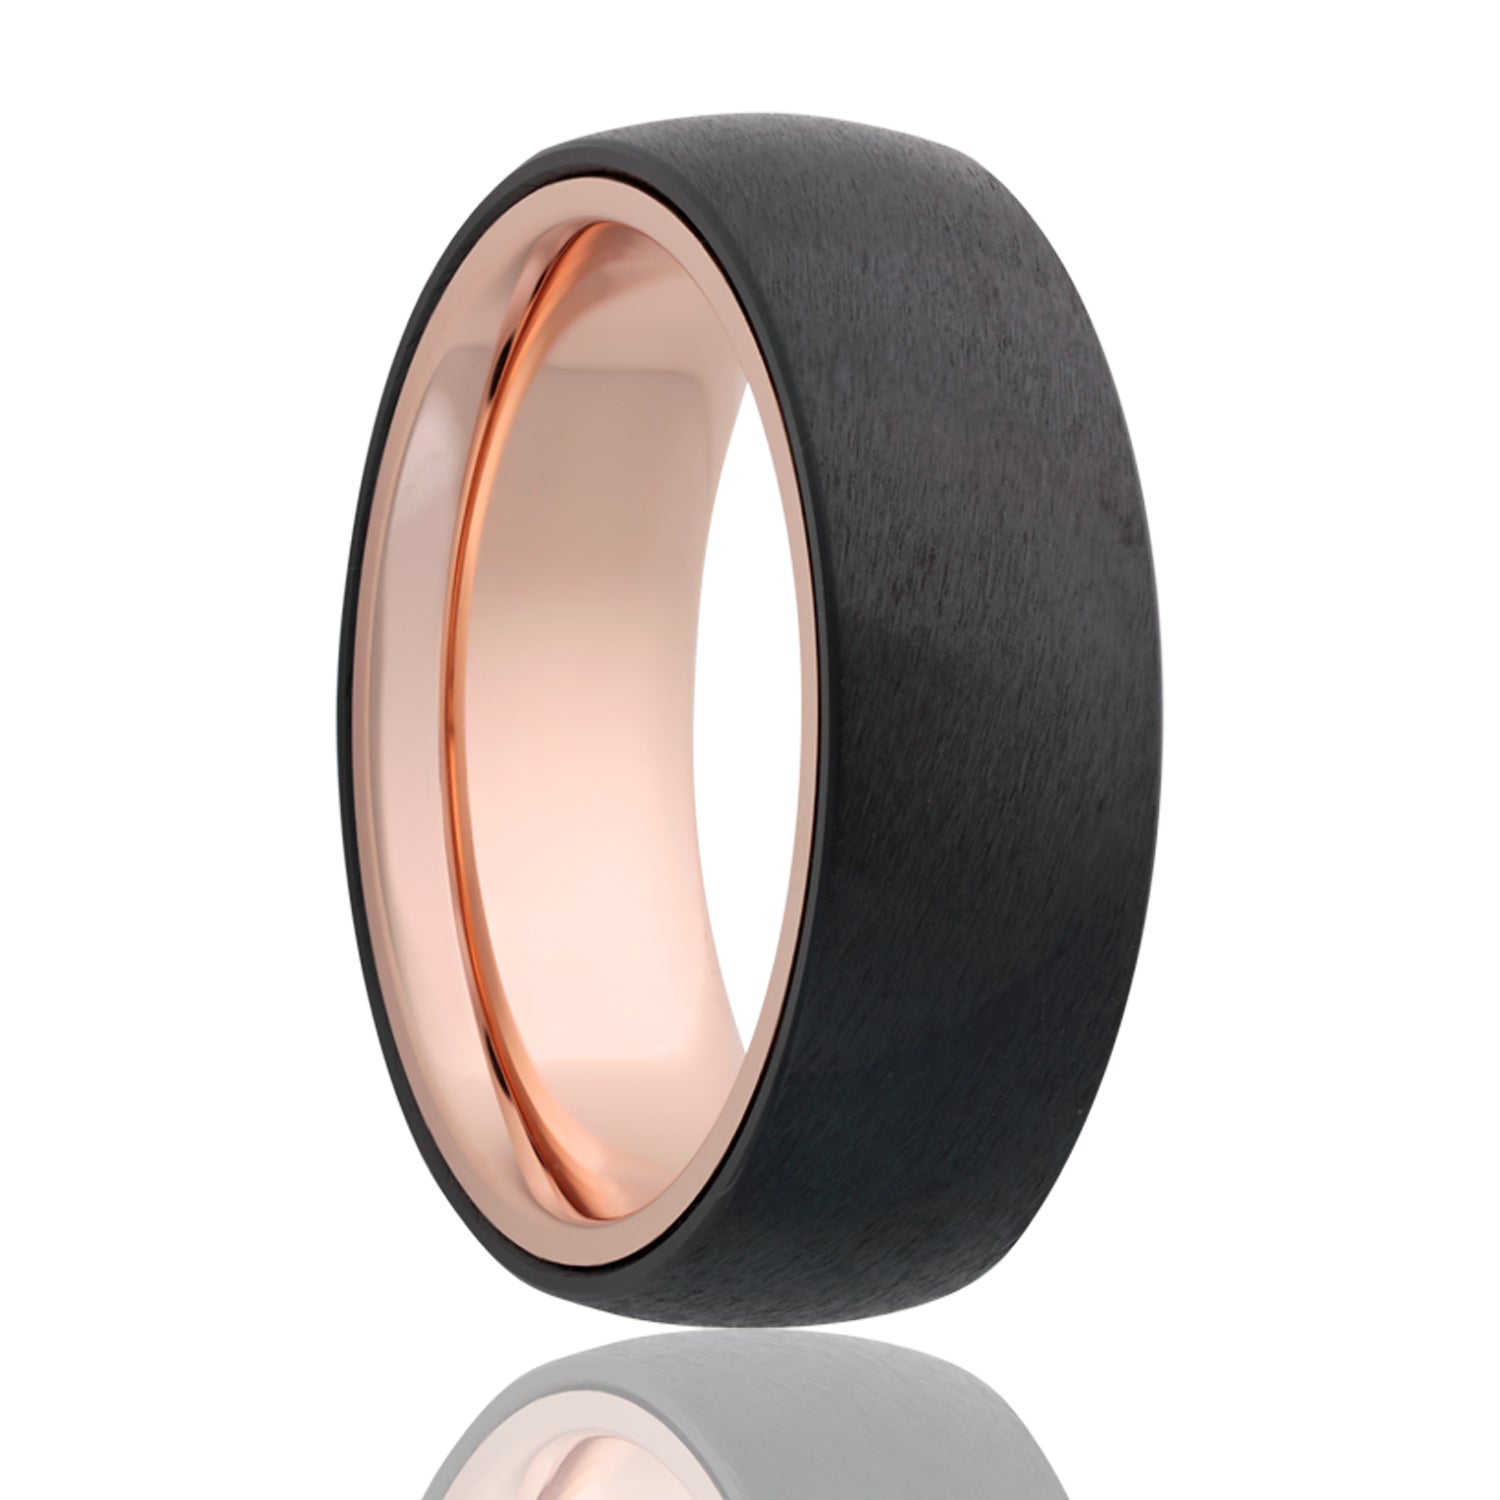 A satin finish zirconium wedding band with contrasting 14k rose gold interior displayed on a neutral white background.